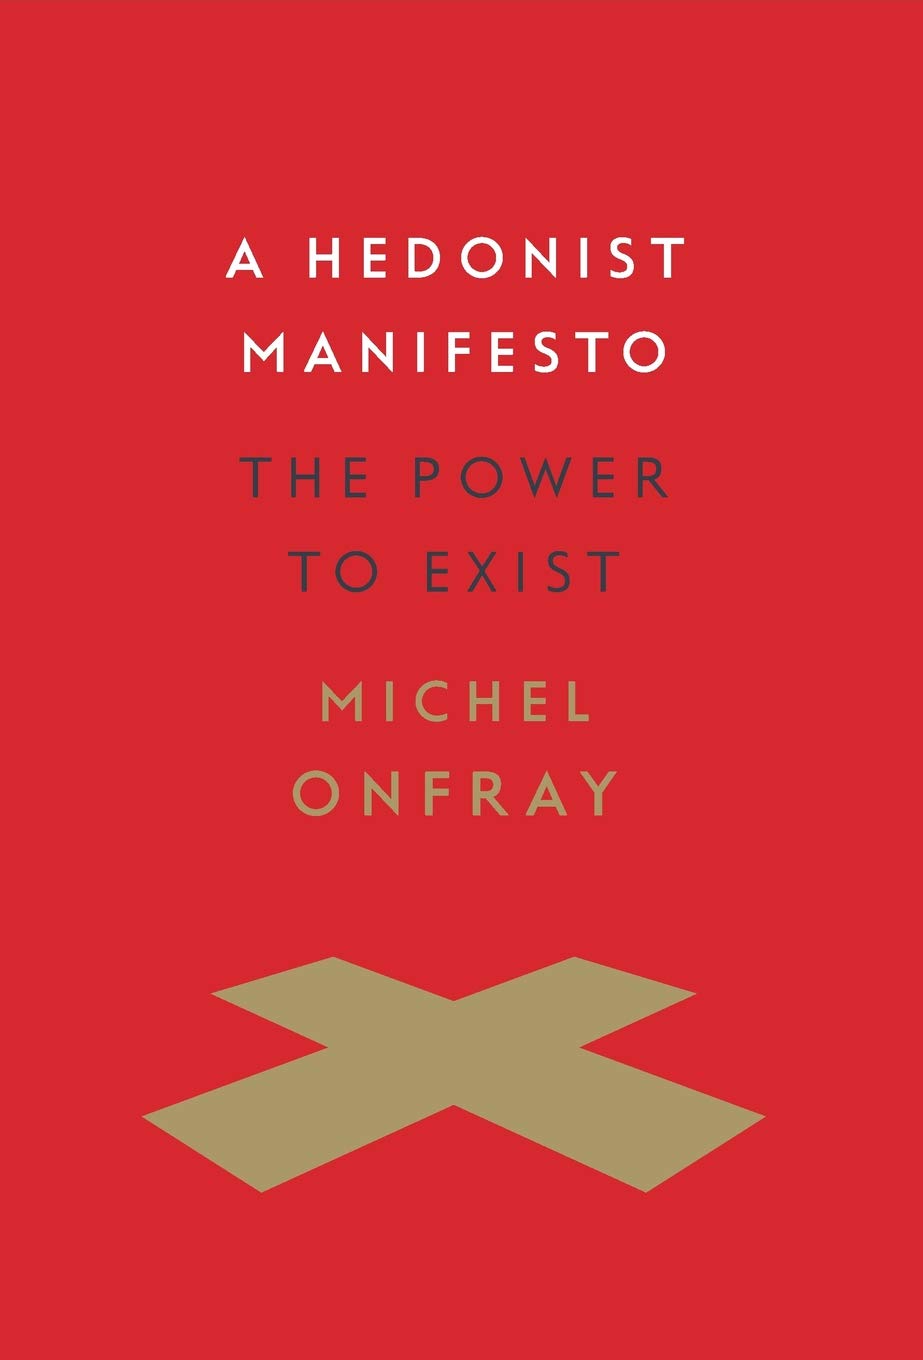 A Hedonist Manifesto: The Power to Exist